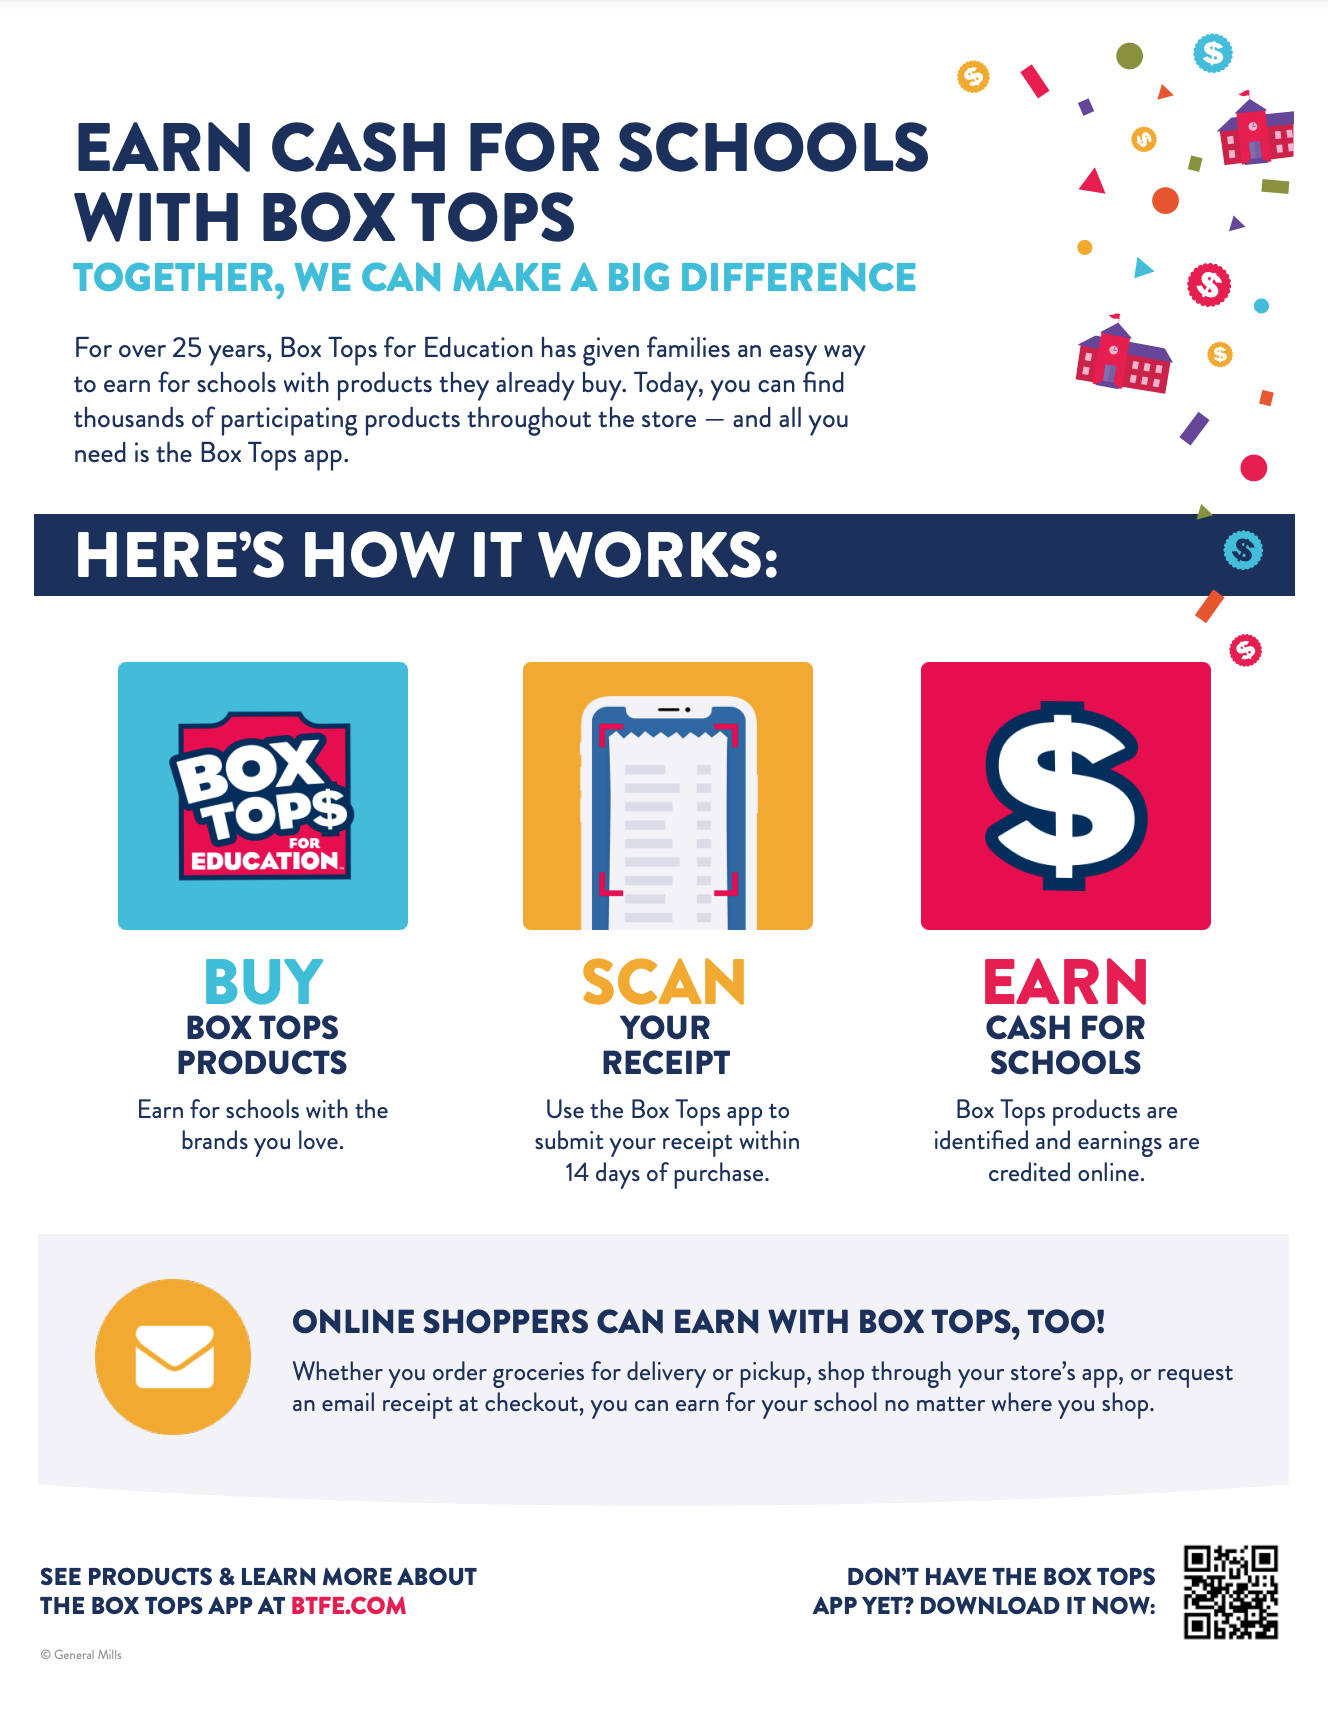 EARN CASH FOR YOUR SCHOOL WITH BOX TOPS
Together we can make a big difference

How it works:
1. Buy Box Tops Products
2. Scan Your Receipt Using the Box Tops App within 14 days of Purchase.
3. Earn Cash for Your School.  

Don't have the app? Download it now!